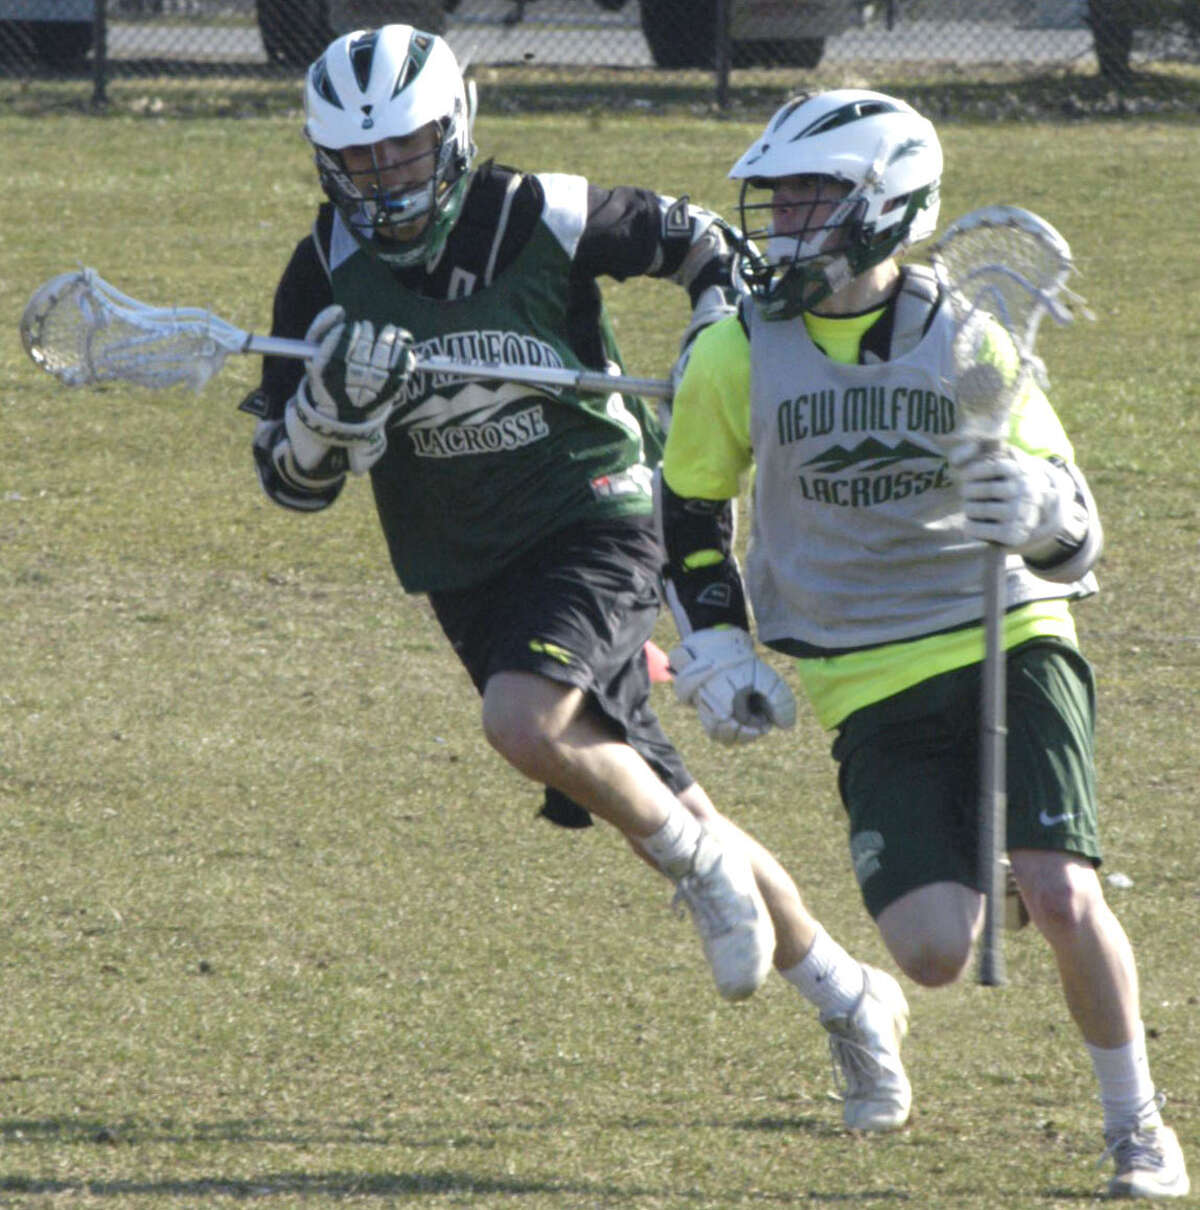 Blaine McMahon and A.J. McDonald of the Green Wave go at it 100 percent during practice for New Milford High School boys' lacrosse, April 2013